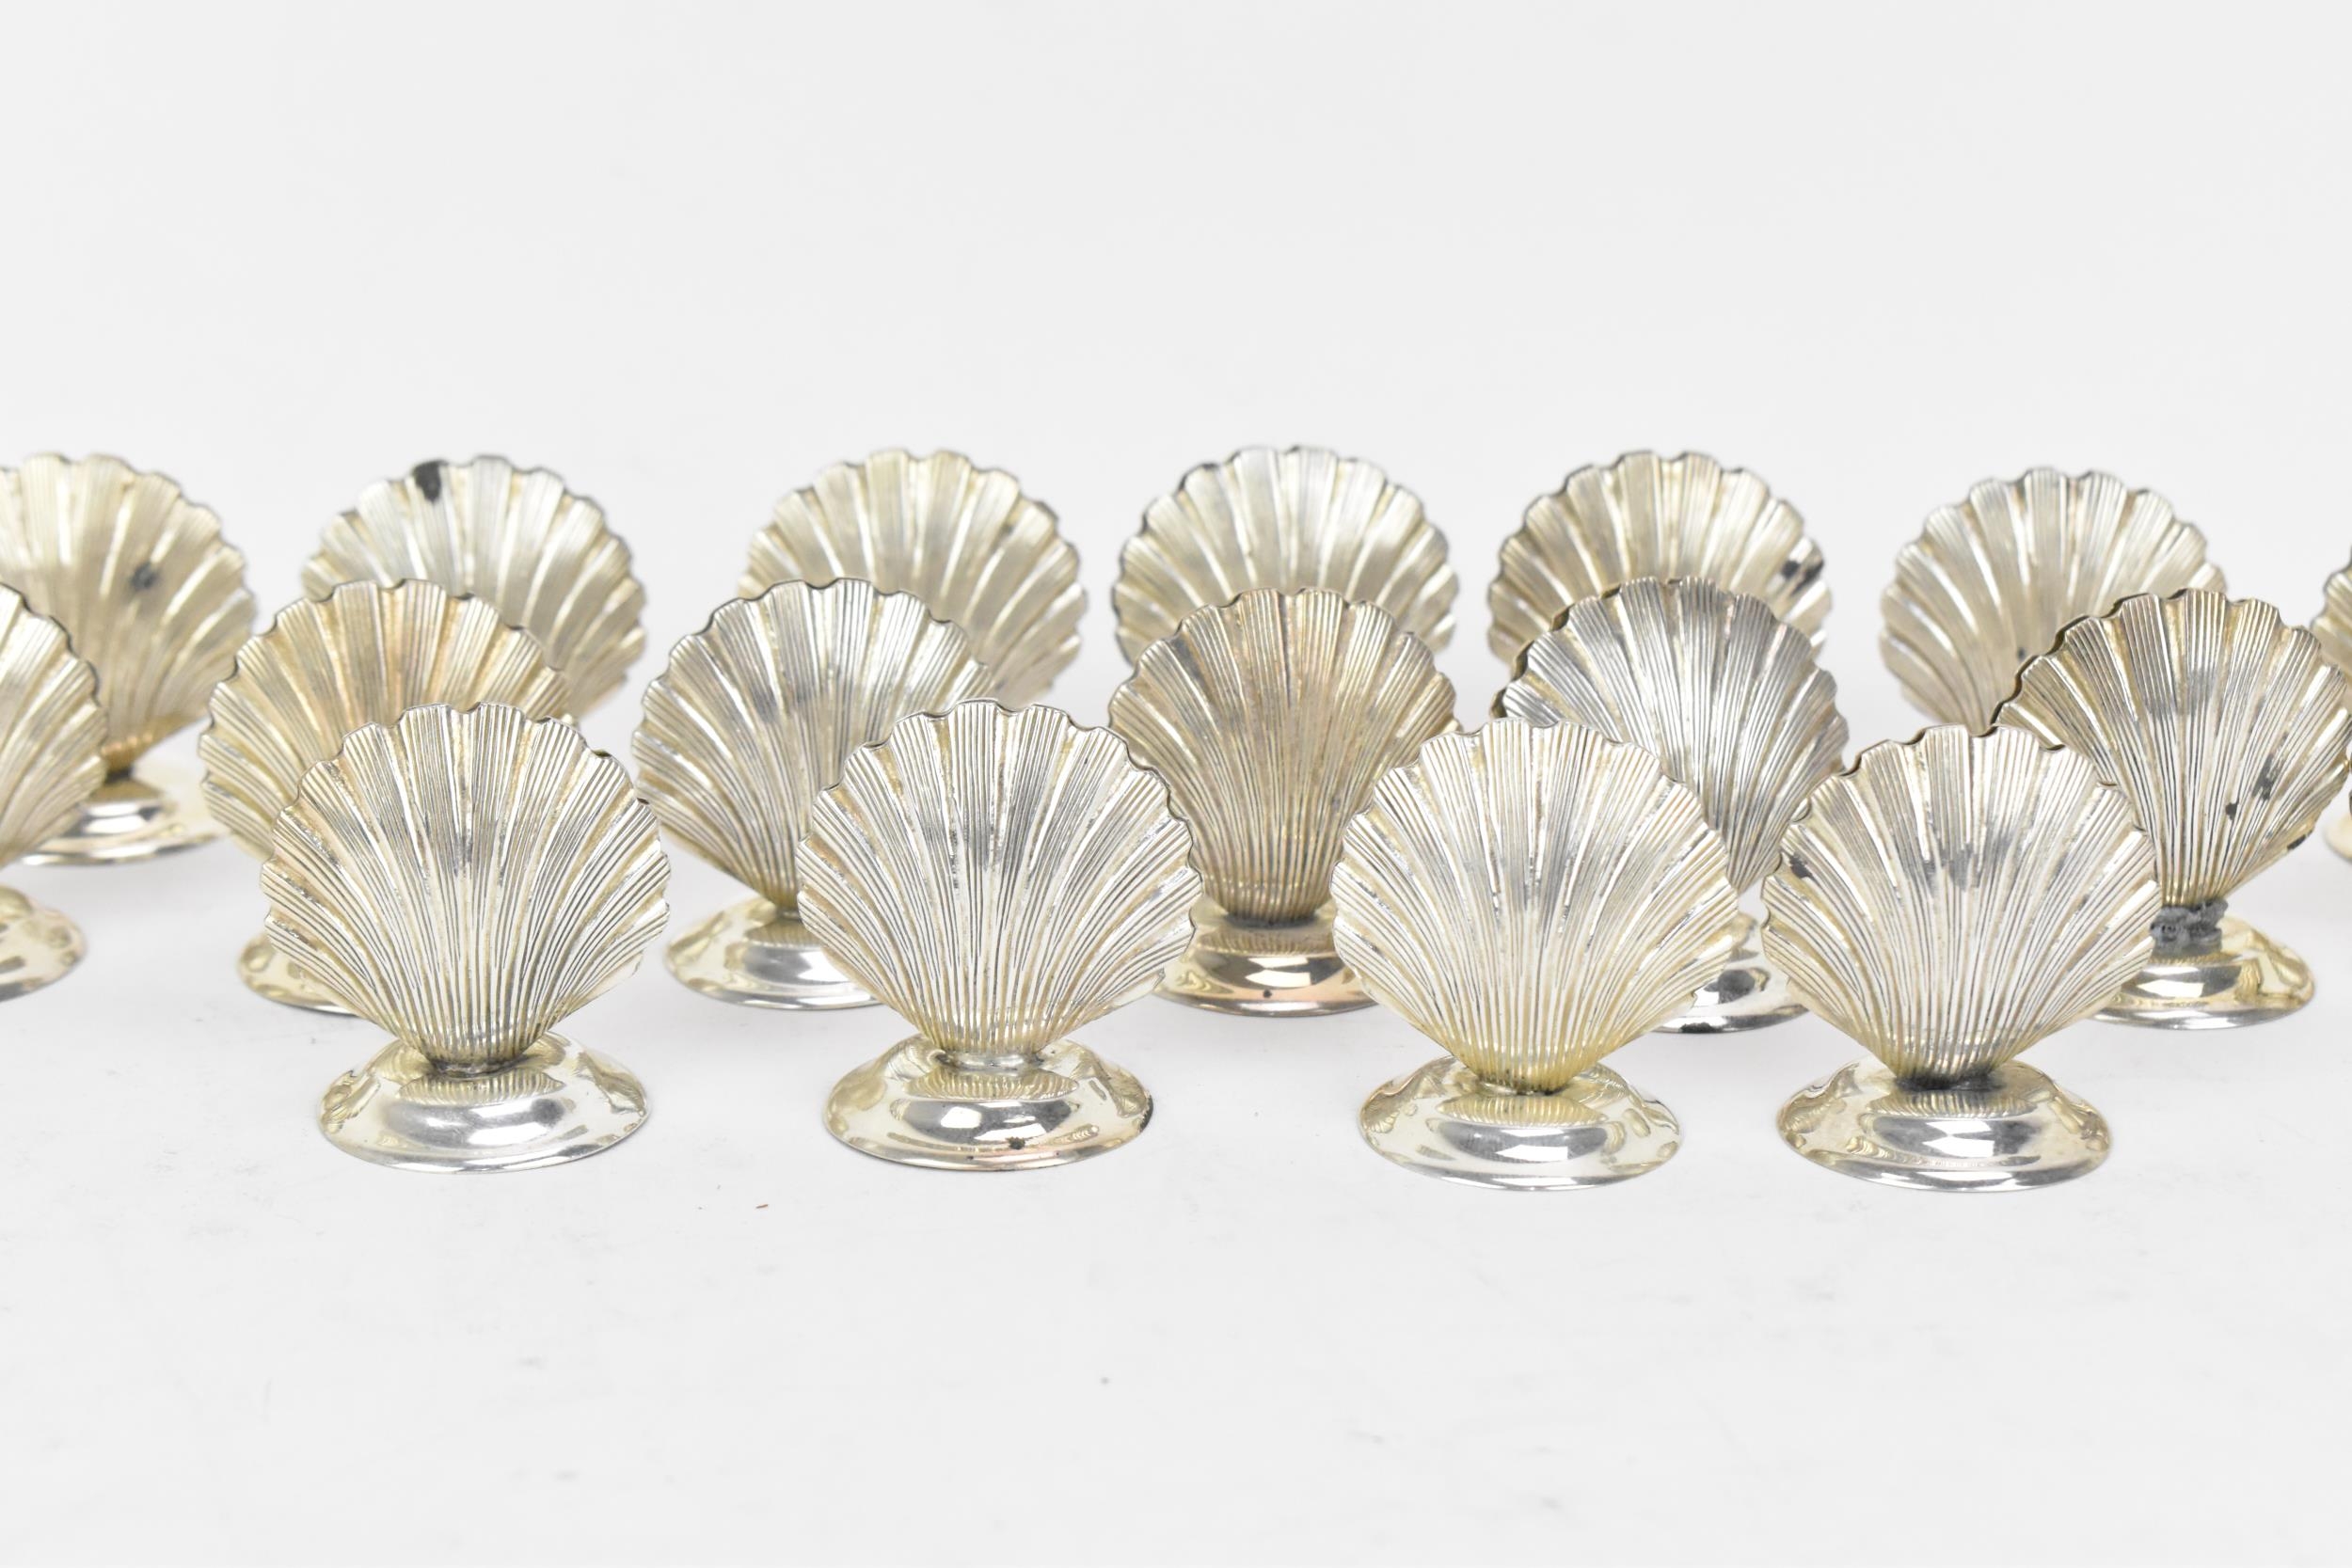 A set of sterling silver shell-shaped menu holders, or place names, each designed as a clam shell - Image 2 of 6